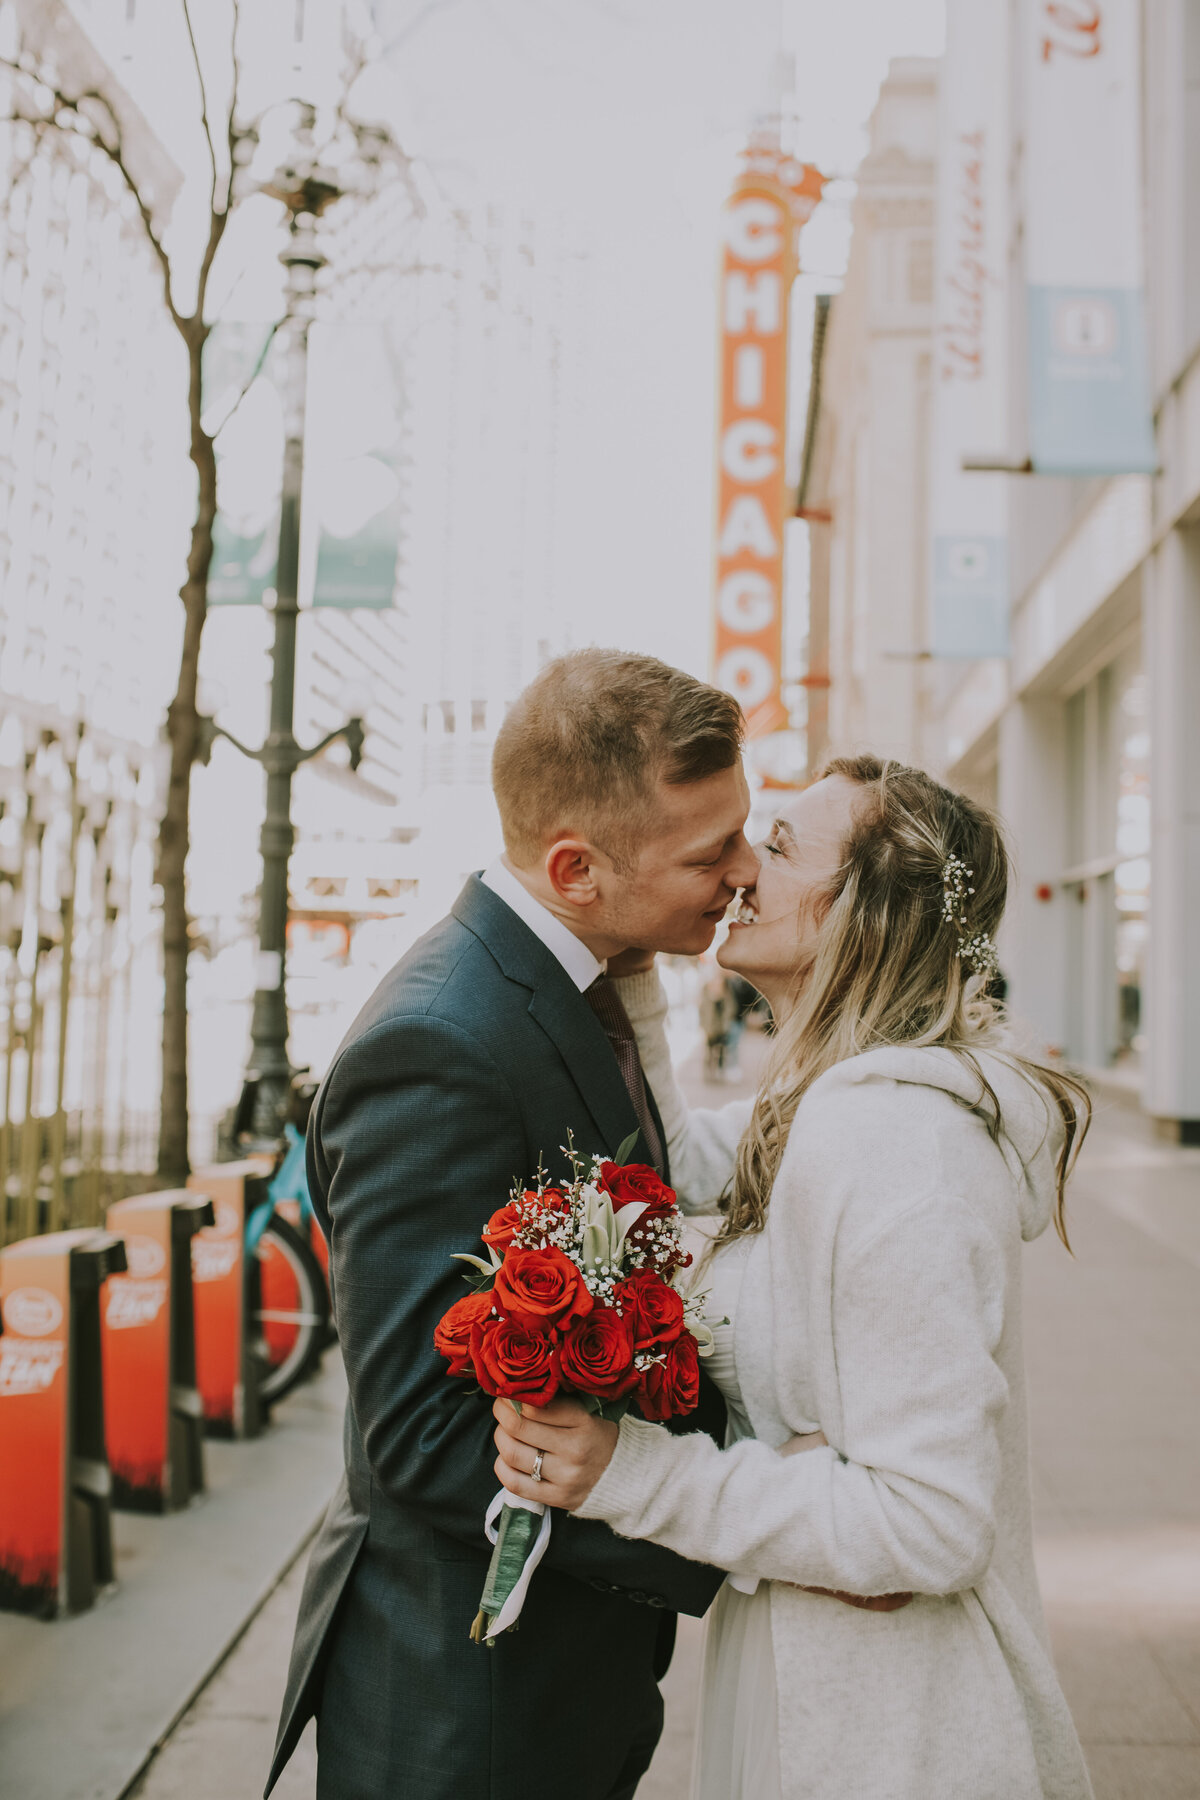 Emma & Vukasin Courthouse Wedding in Chicago March 2019 (203)